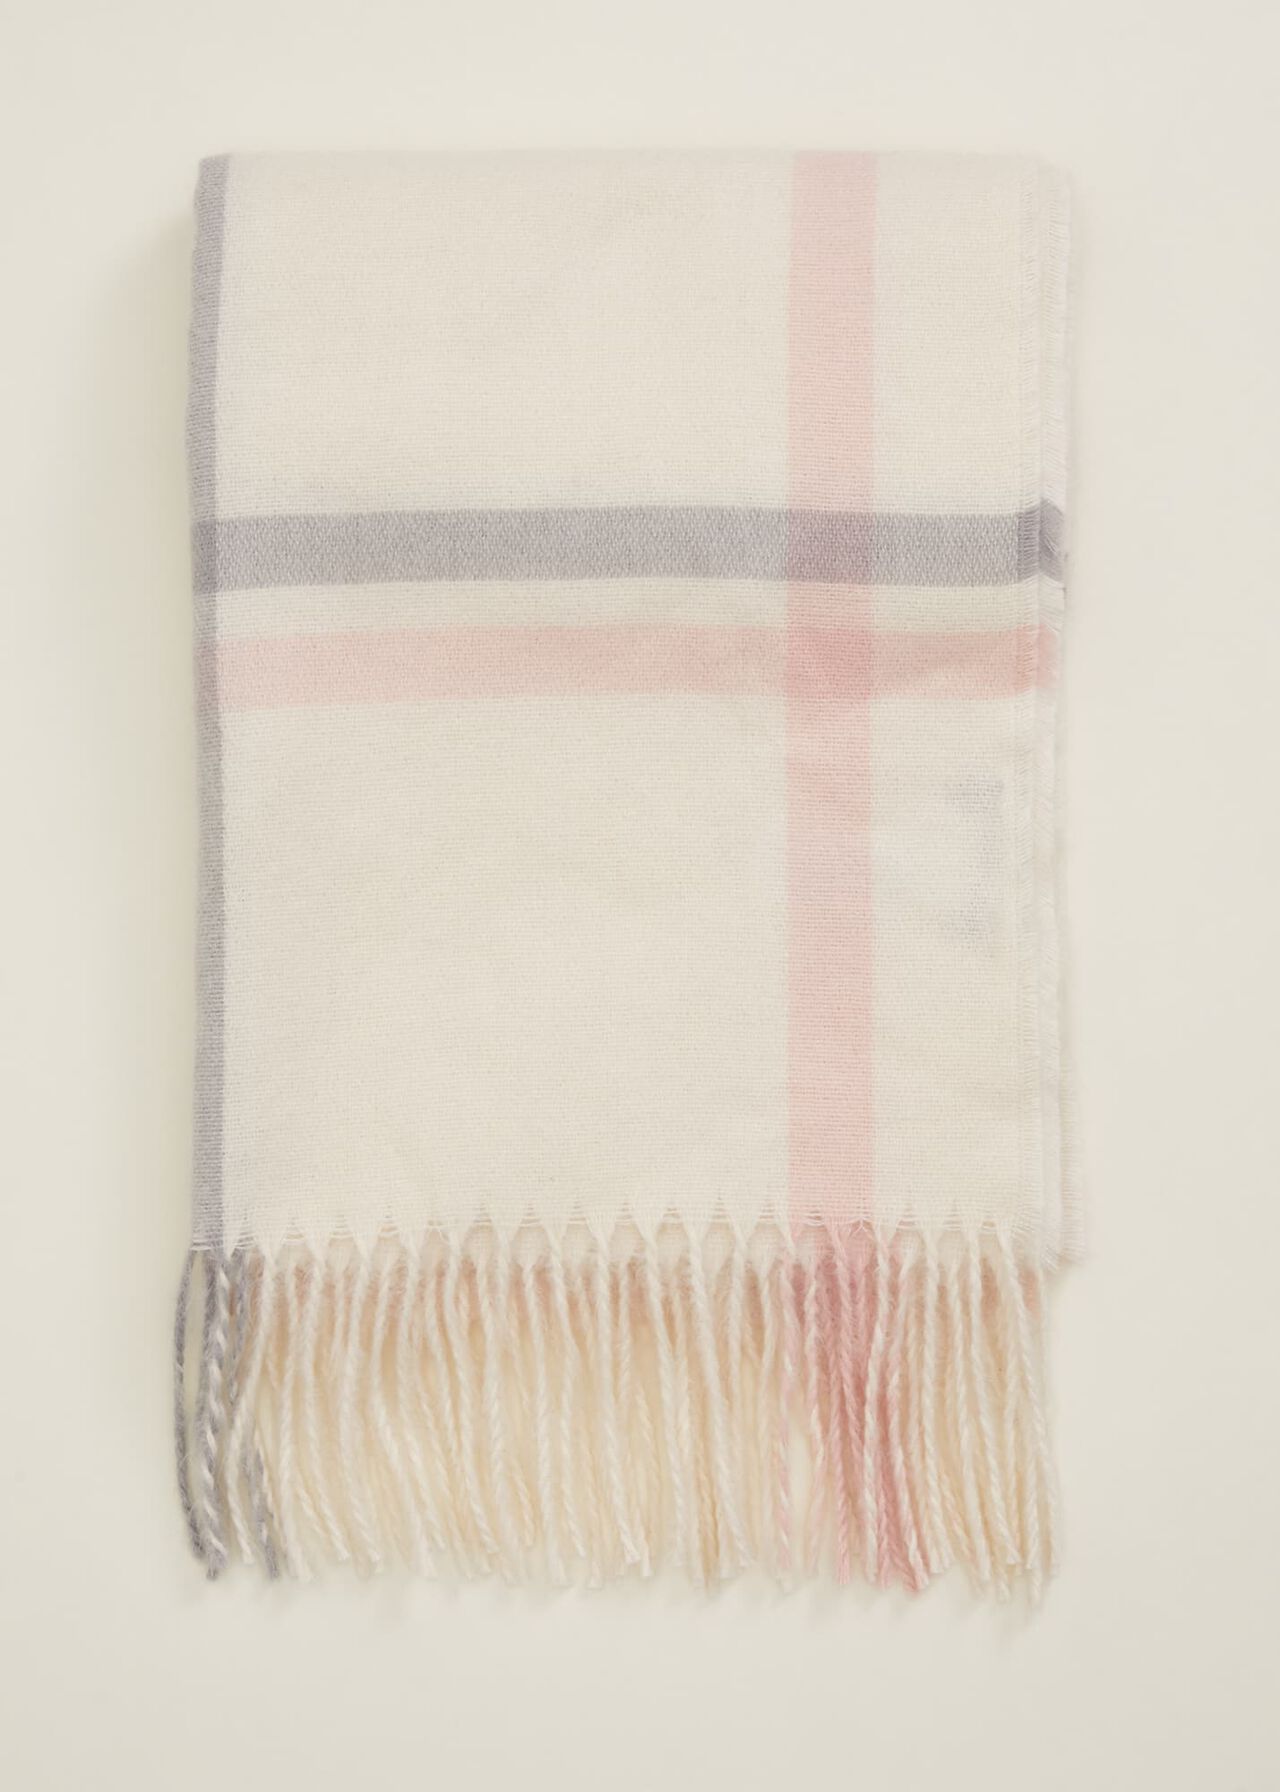 Sollie Check Scarf